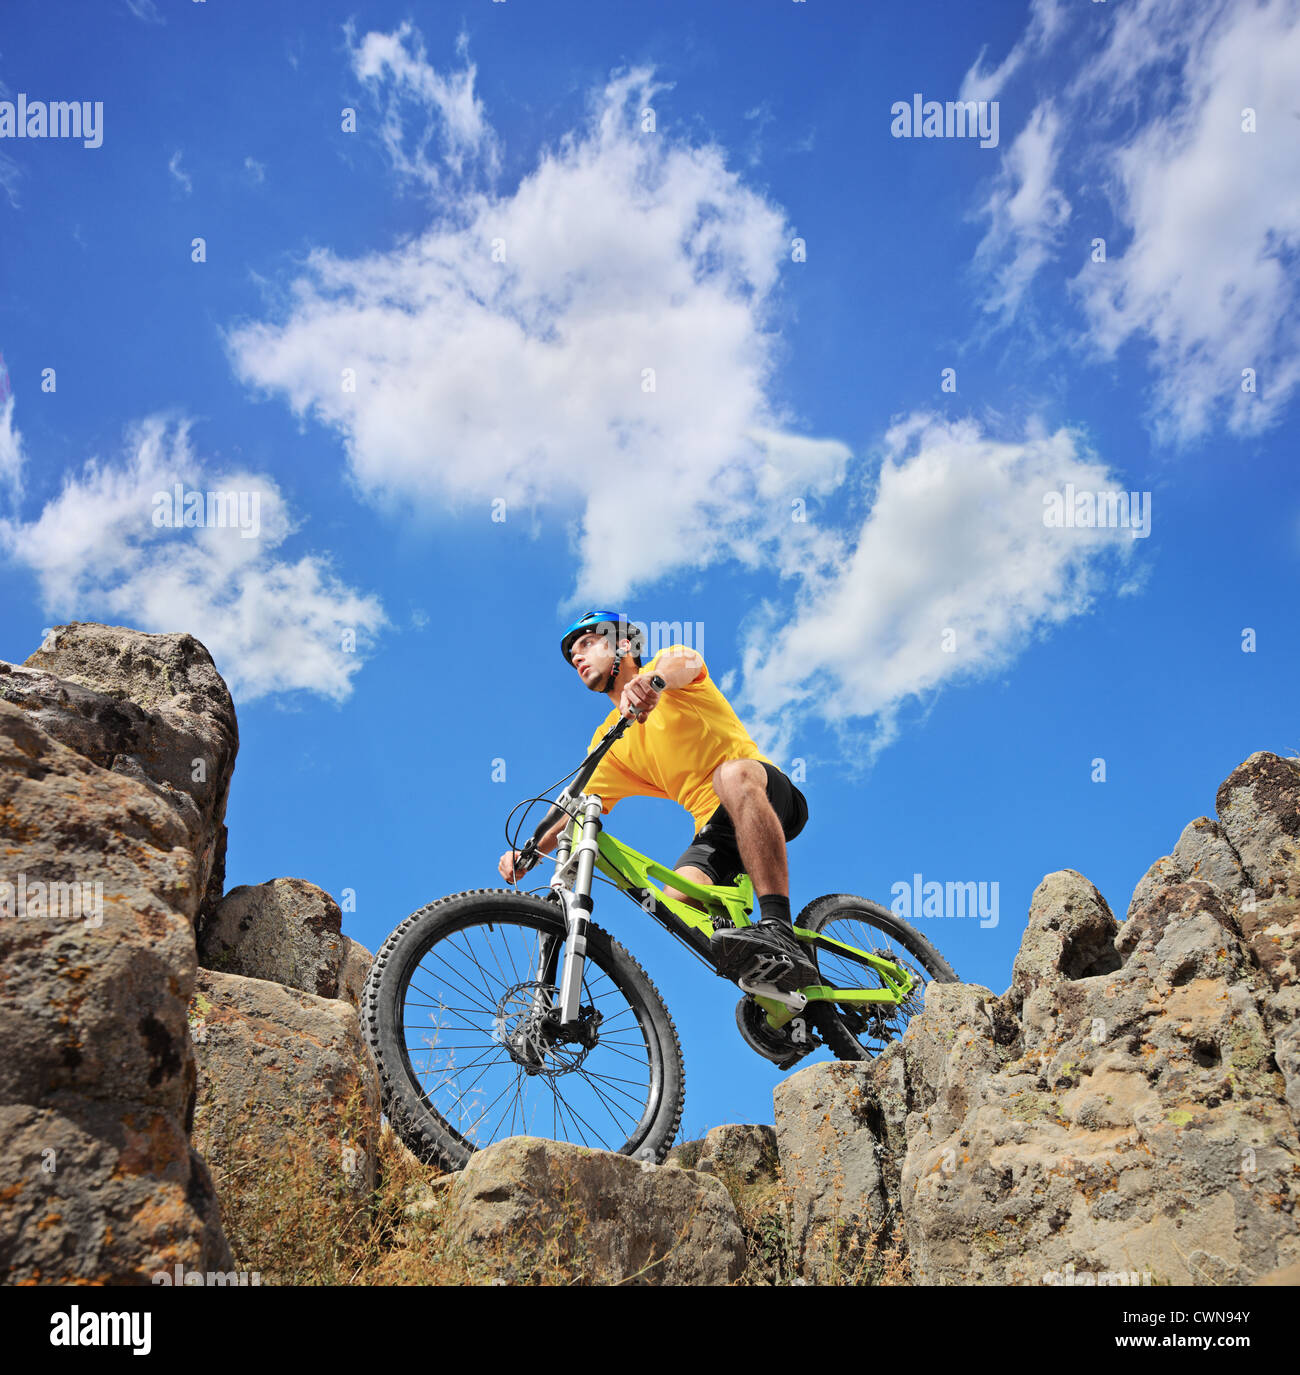 A person riding a mountain bike on a sunny day, low angle view Stock Photo